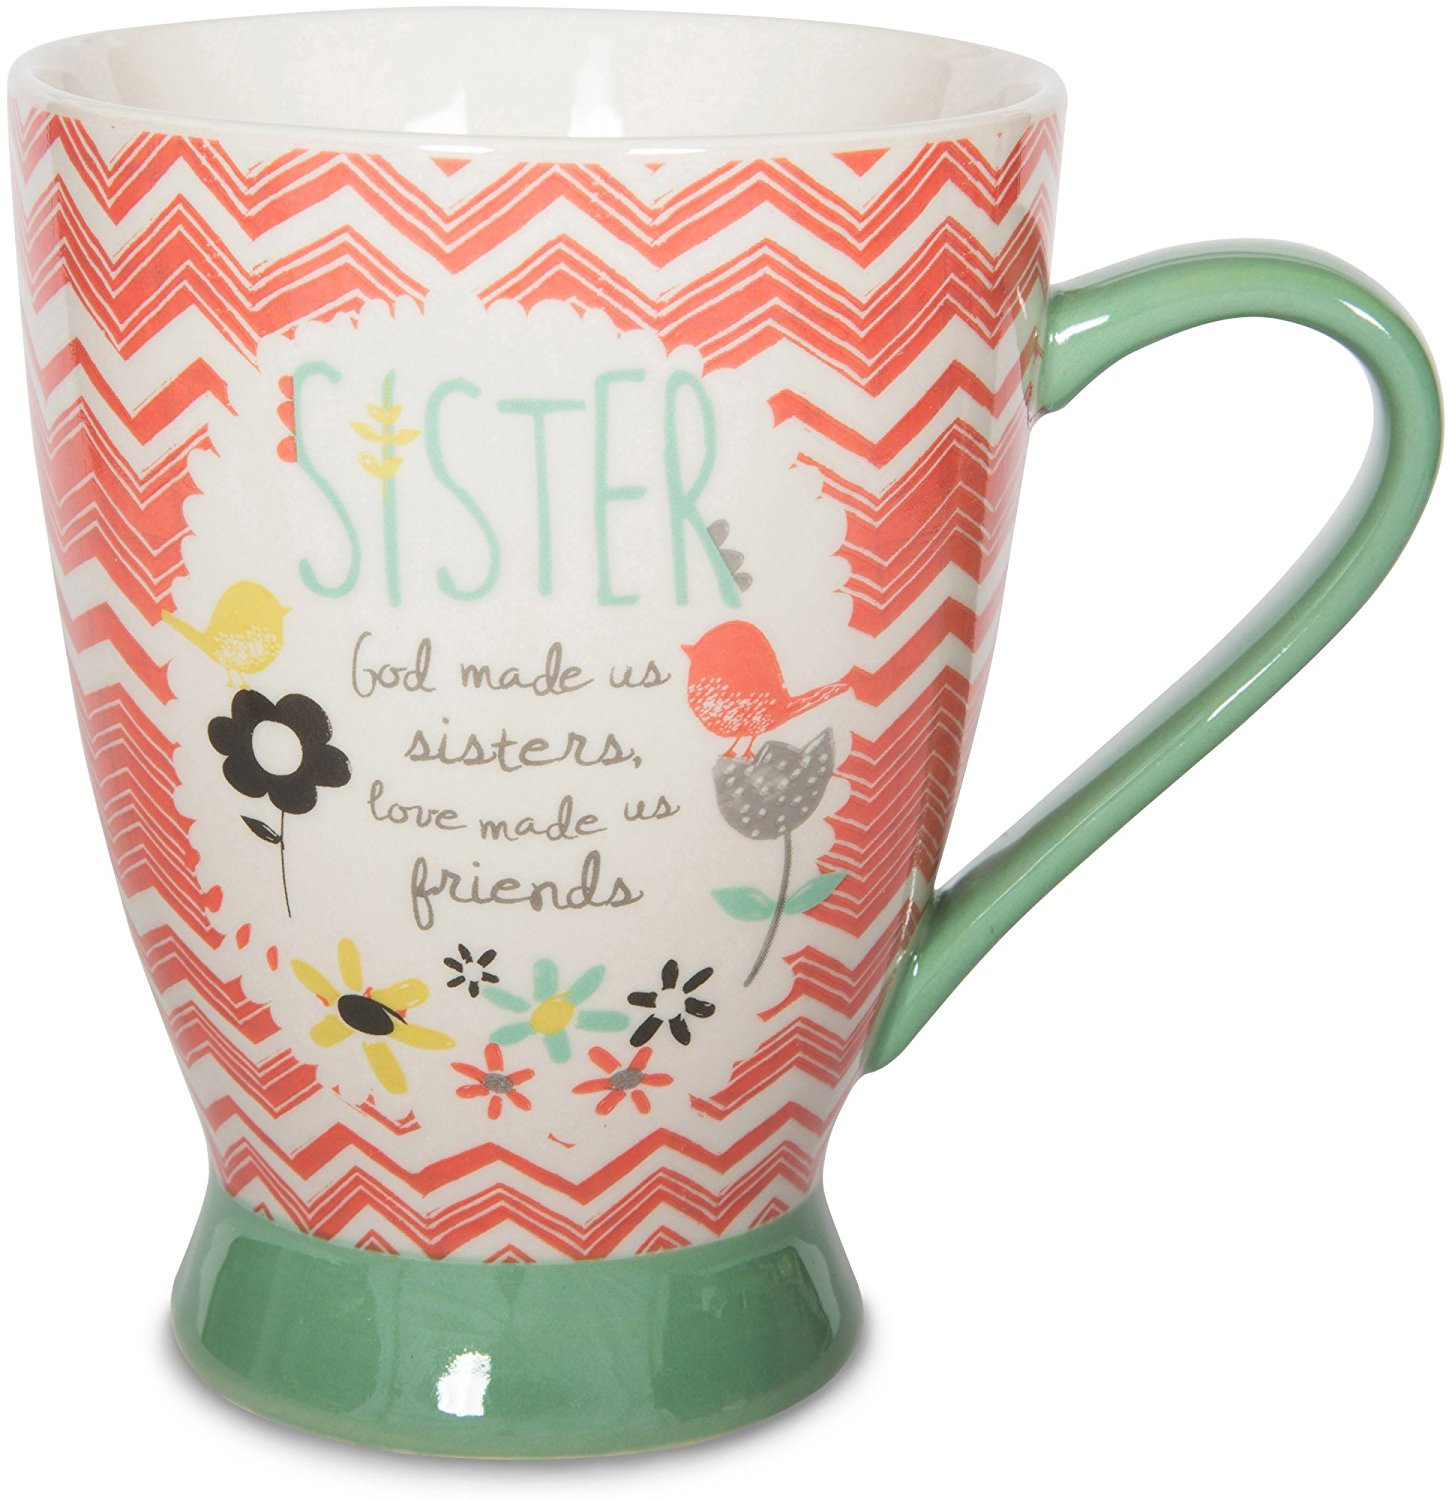 Gift Ideas For Sister Birthday
 105 Perfect Birthday Gift Ideas for Sister